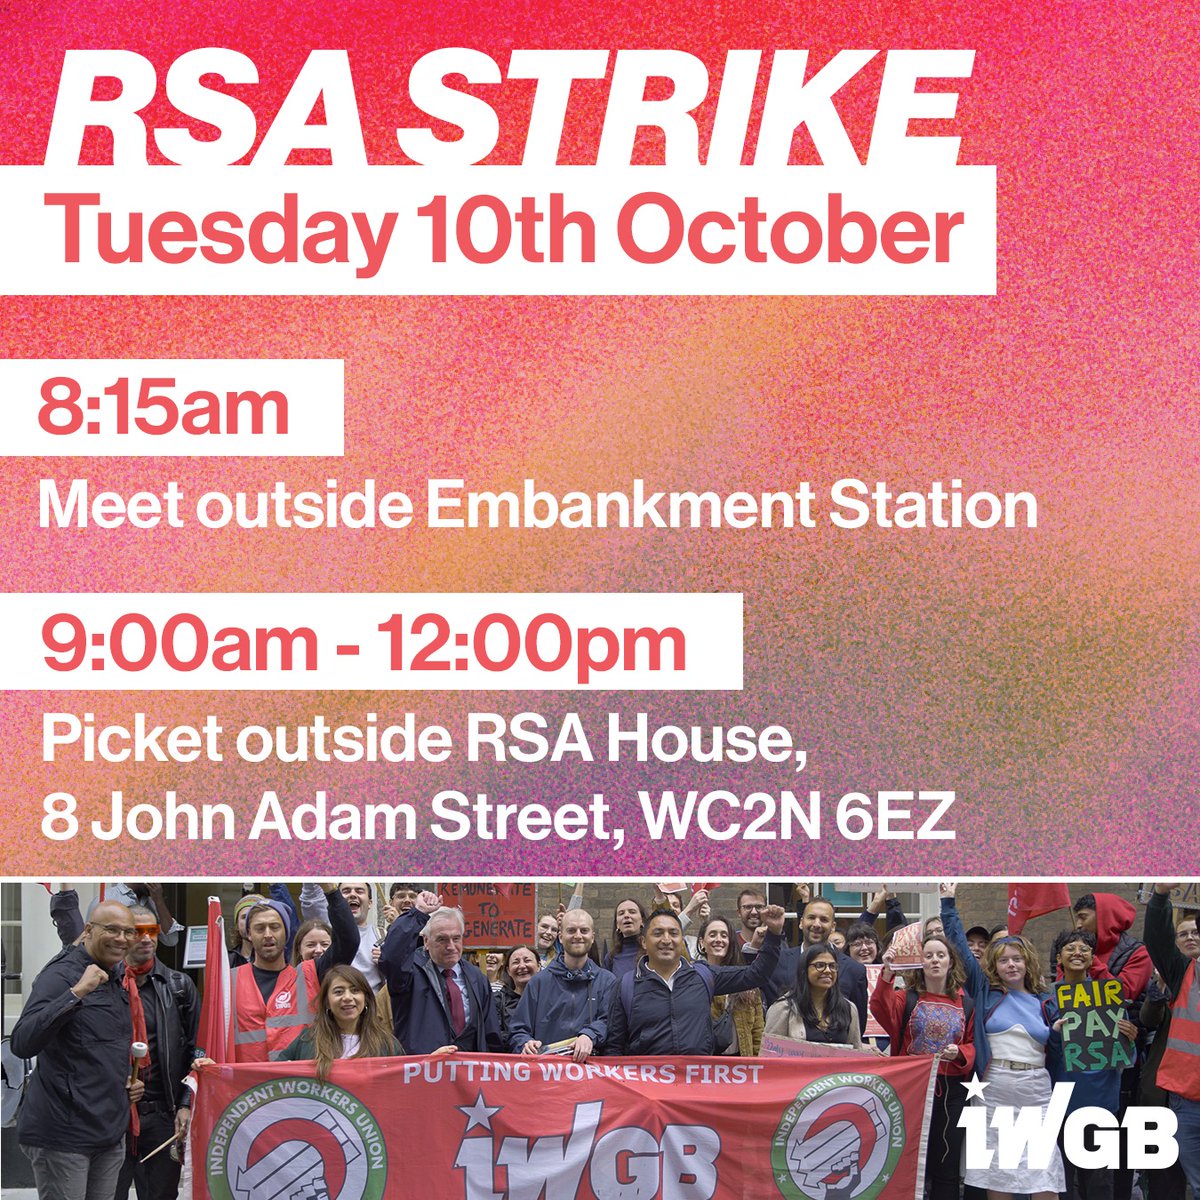 As we prepare for round#2 of strikes on the 10th, the #RSA have been in touch & despite sitting on £8.7 million in reserves they are not budging on their offer of a one off payment of £500! We demand a proper pay rise, not one offs! See you all on the pickets on Tuesday!😎🥁1/2